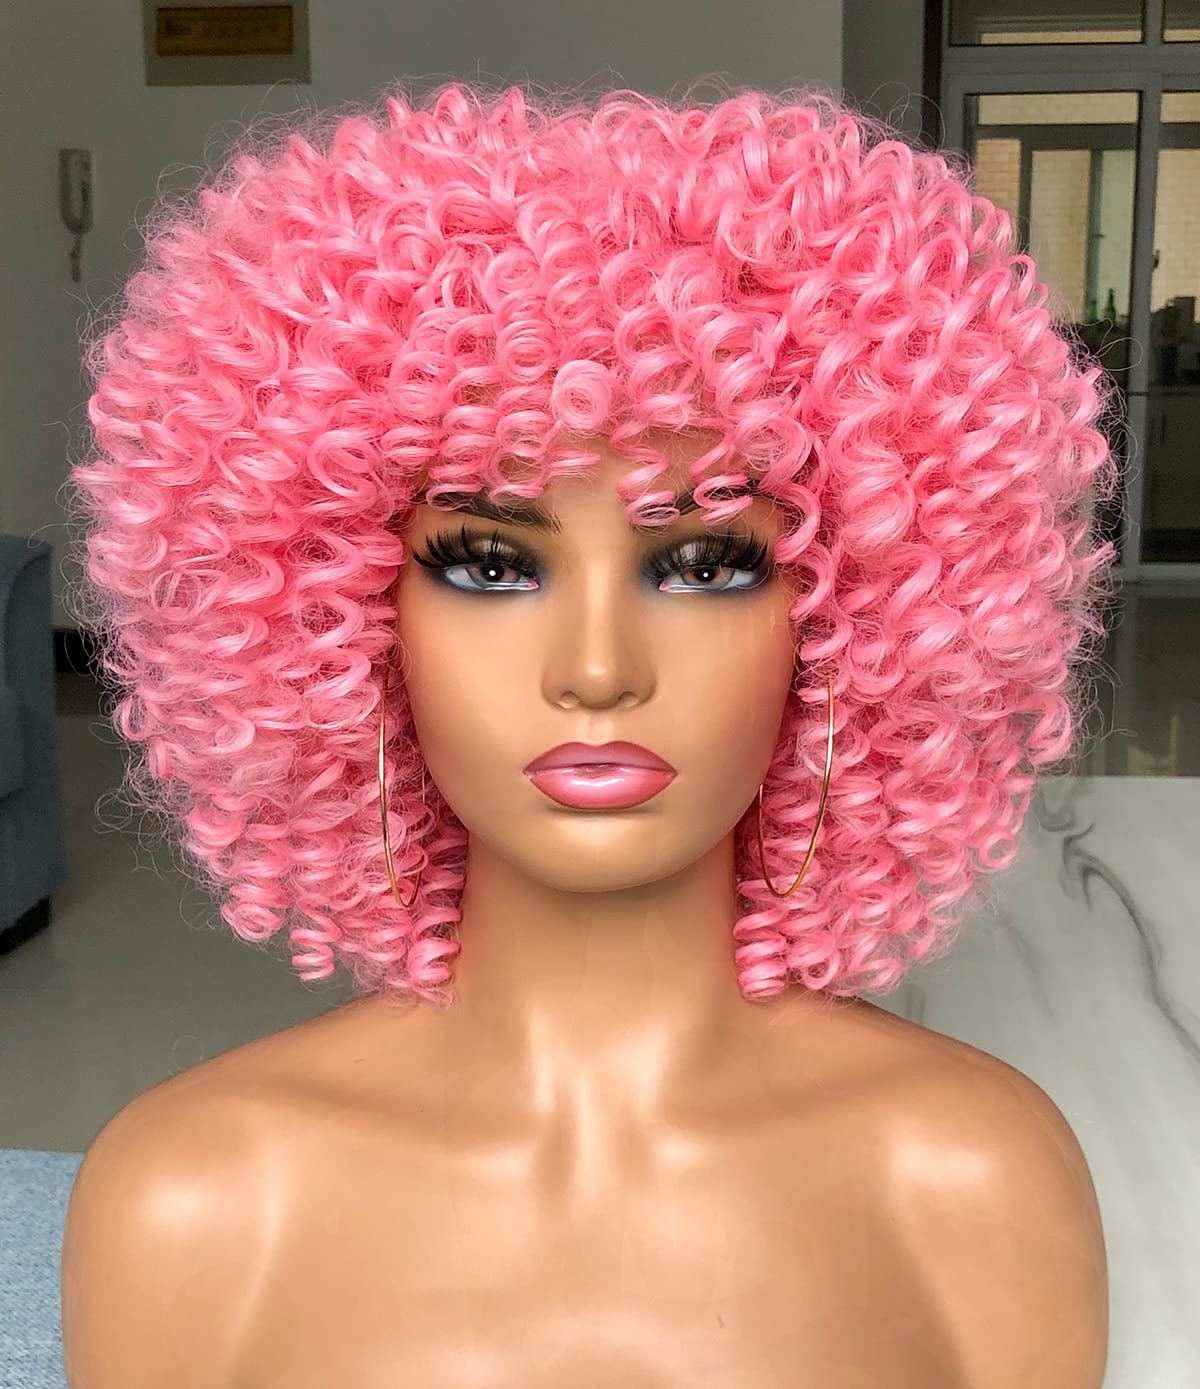 Annivia Afro Curly Wigs With Bangs Short Kinky Curly Wigs For Black Women Synthetic Pink